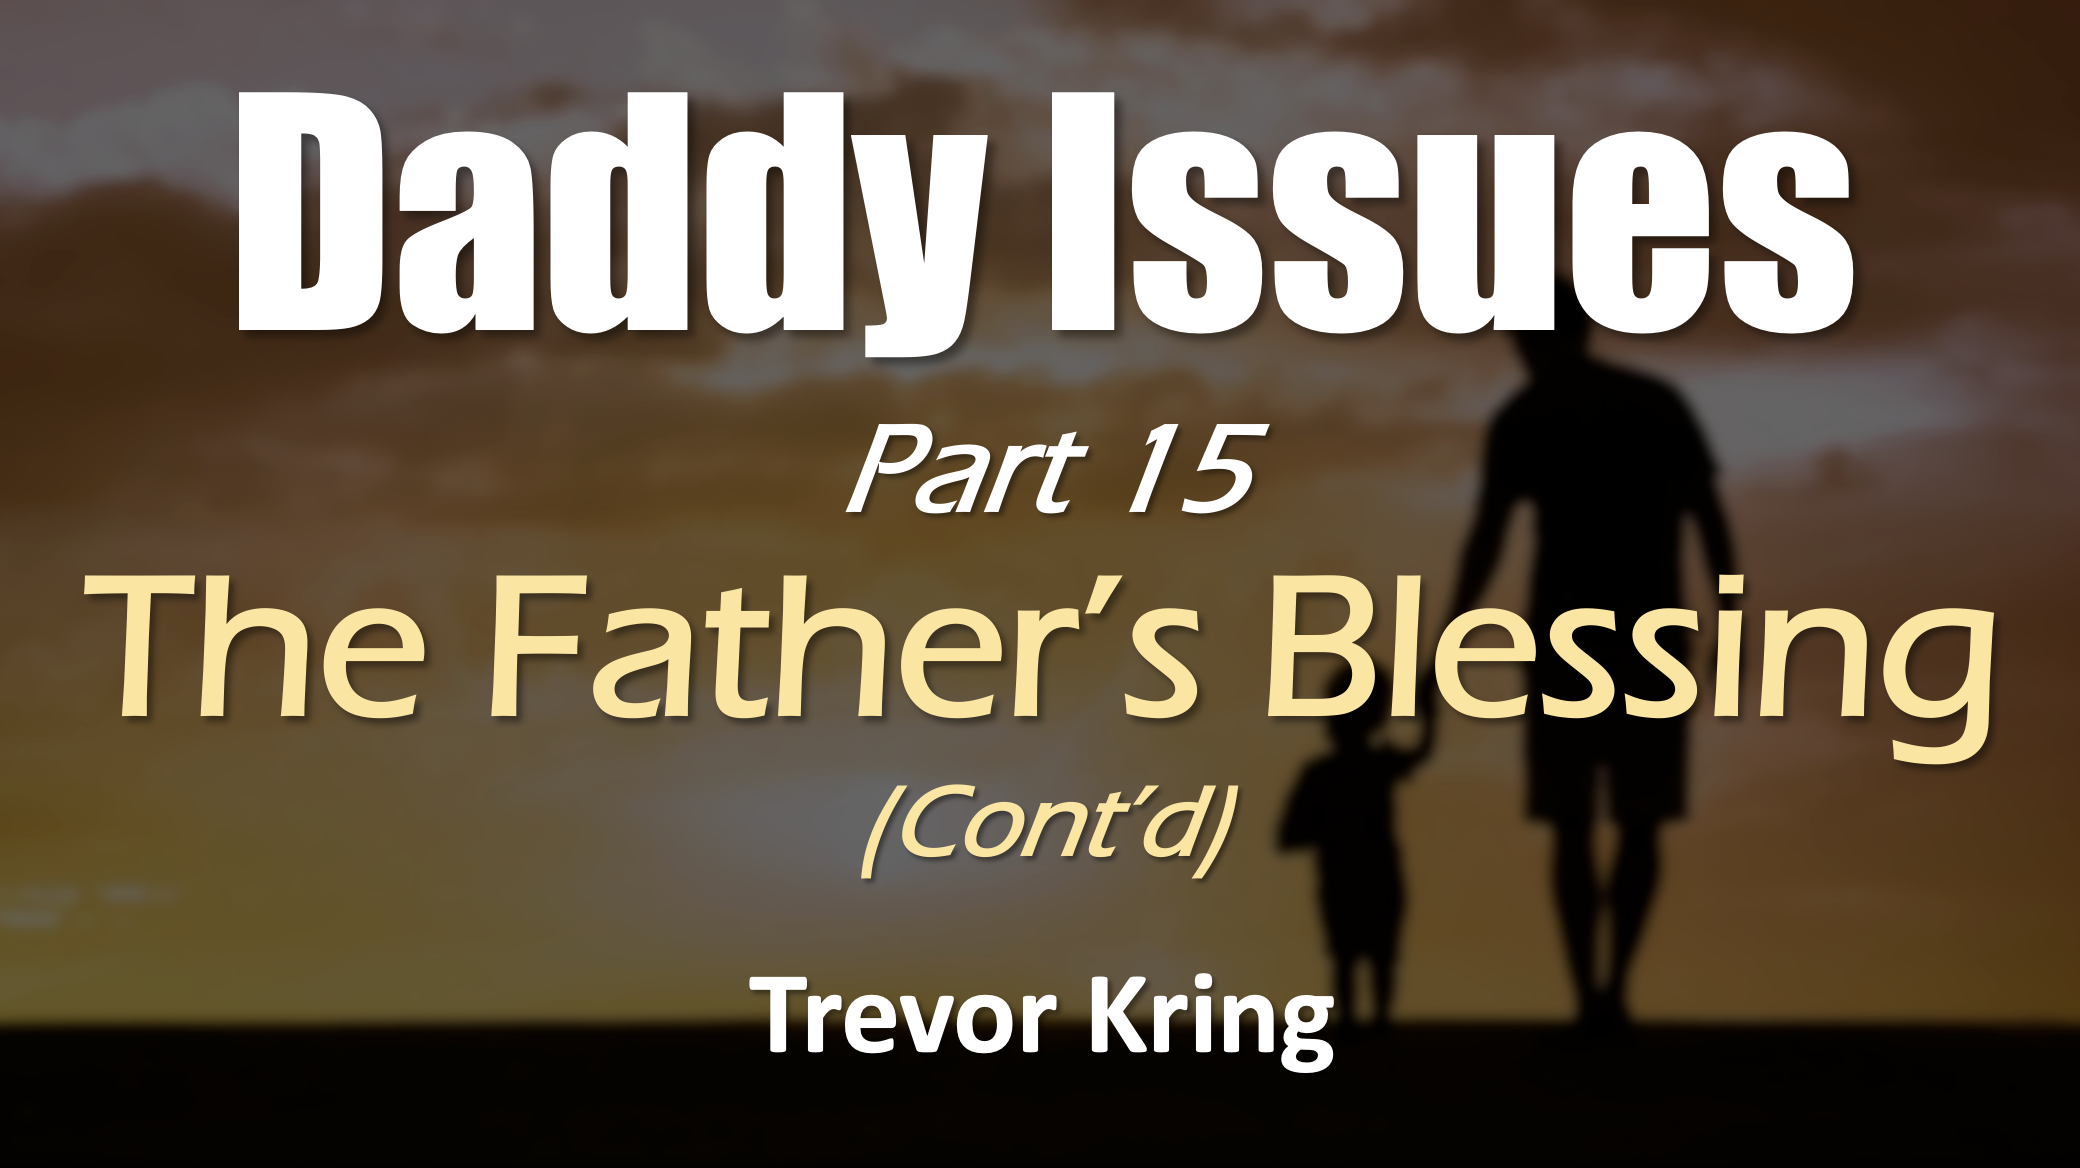 Daddy Issues - Part 15 The Father's Blessing Cont'd